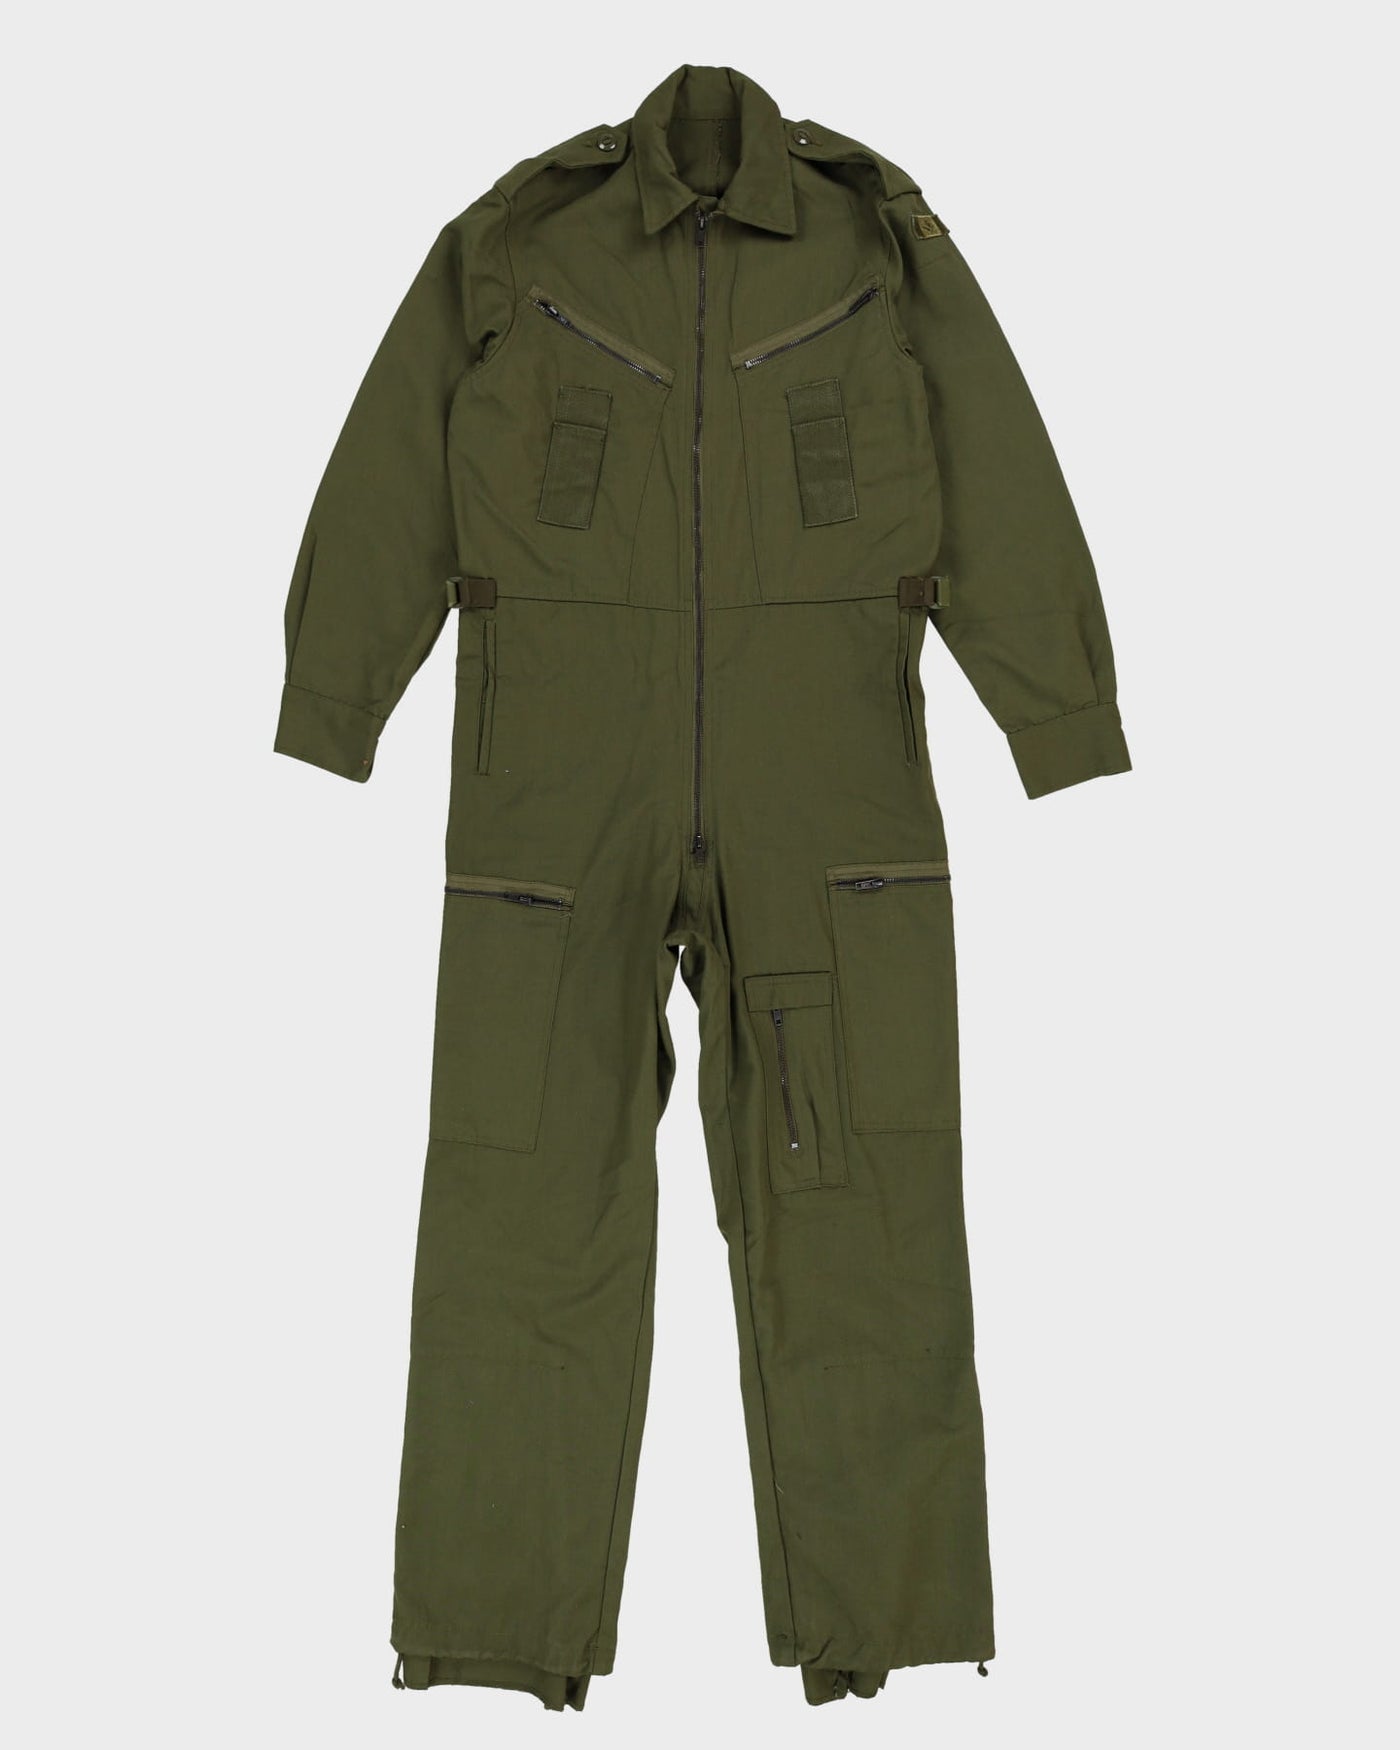 2010s Canadian Army CVC 'Tanker' Coveralls - X-Large